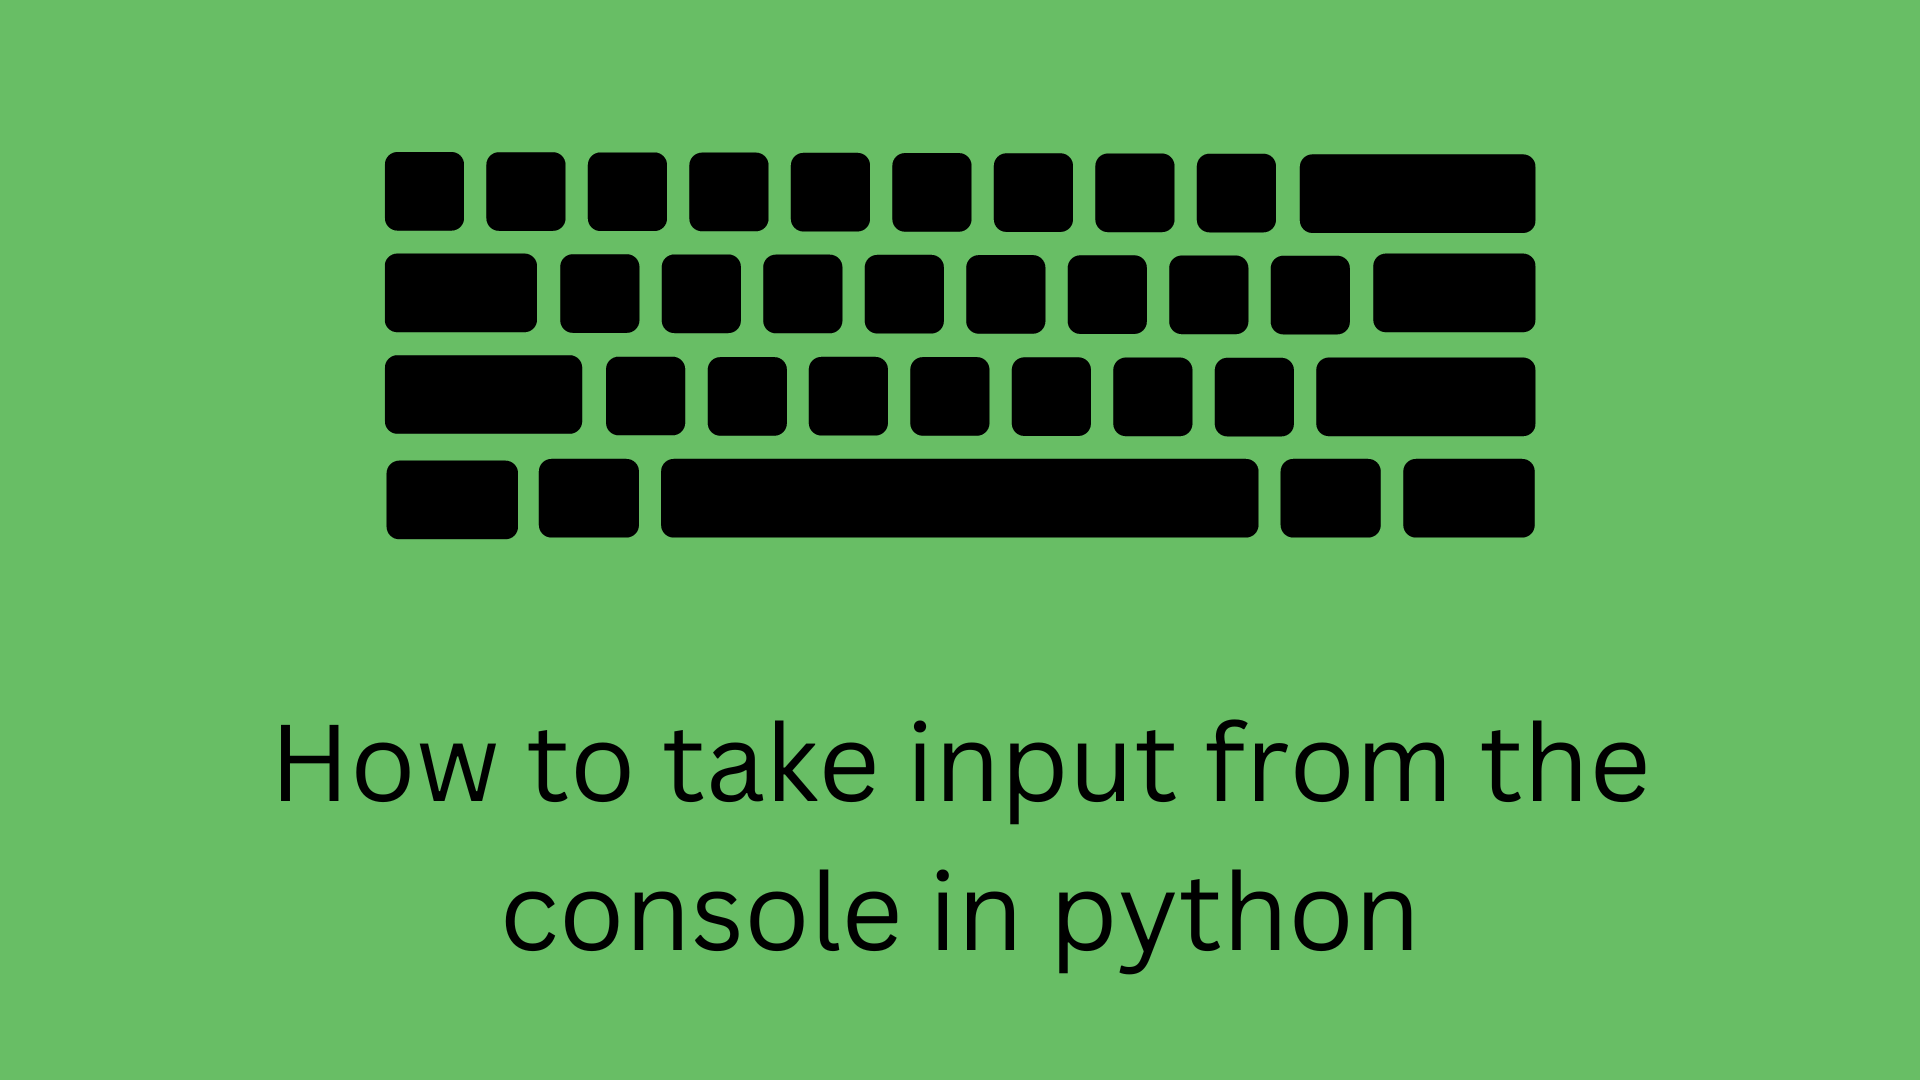 How to take input from the console in python